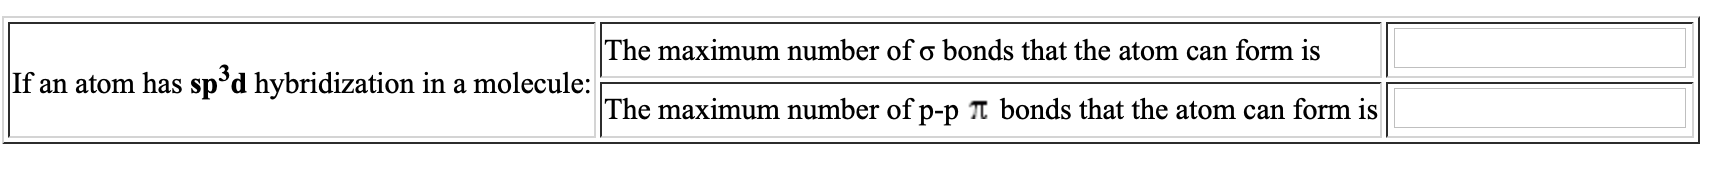 The maximum number of o bonds that the atom can form is
If an atom has sp°d hybridization in a molecule:
The maximum number of p-p Tt bonds that the atom can form is
